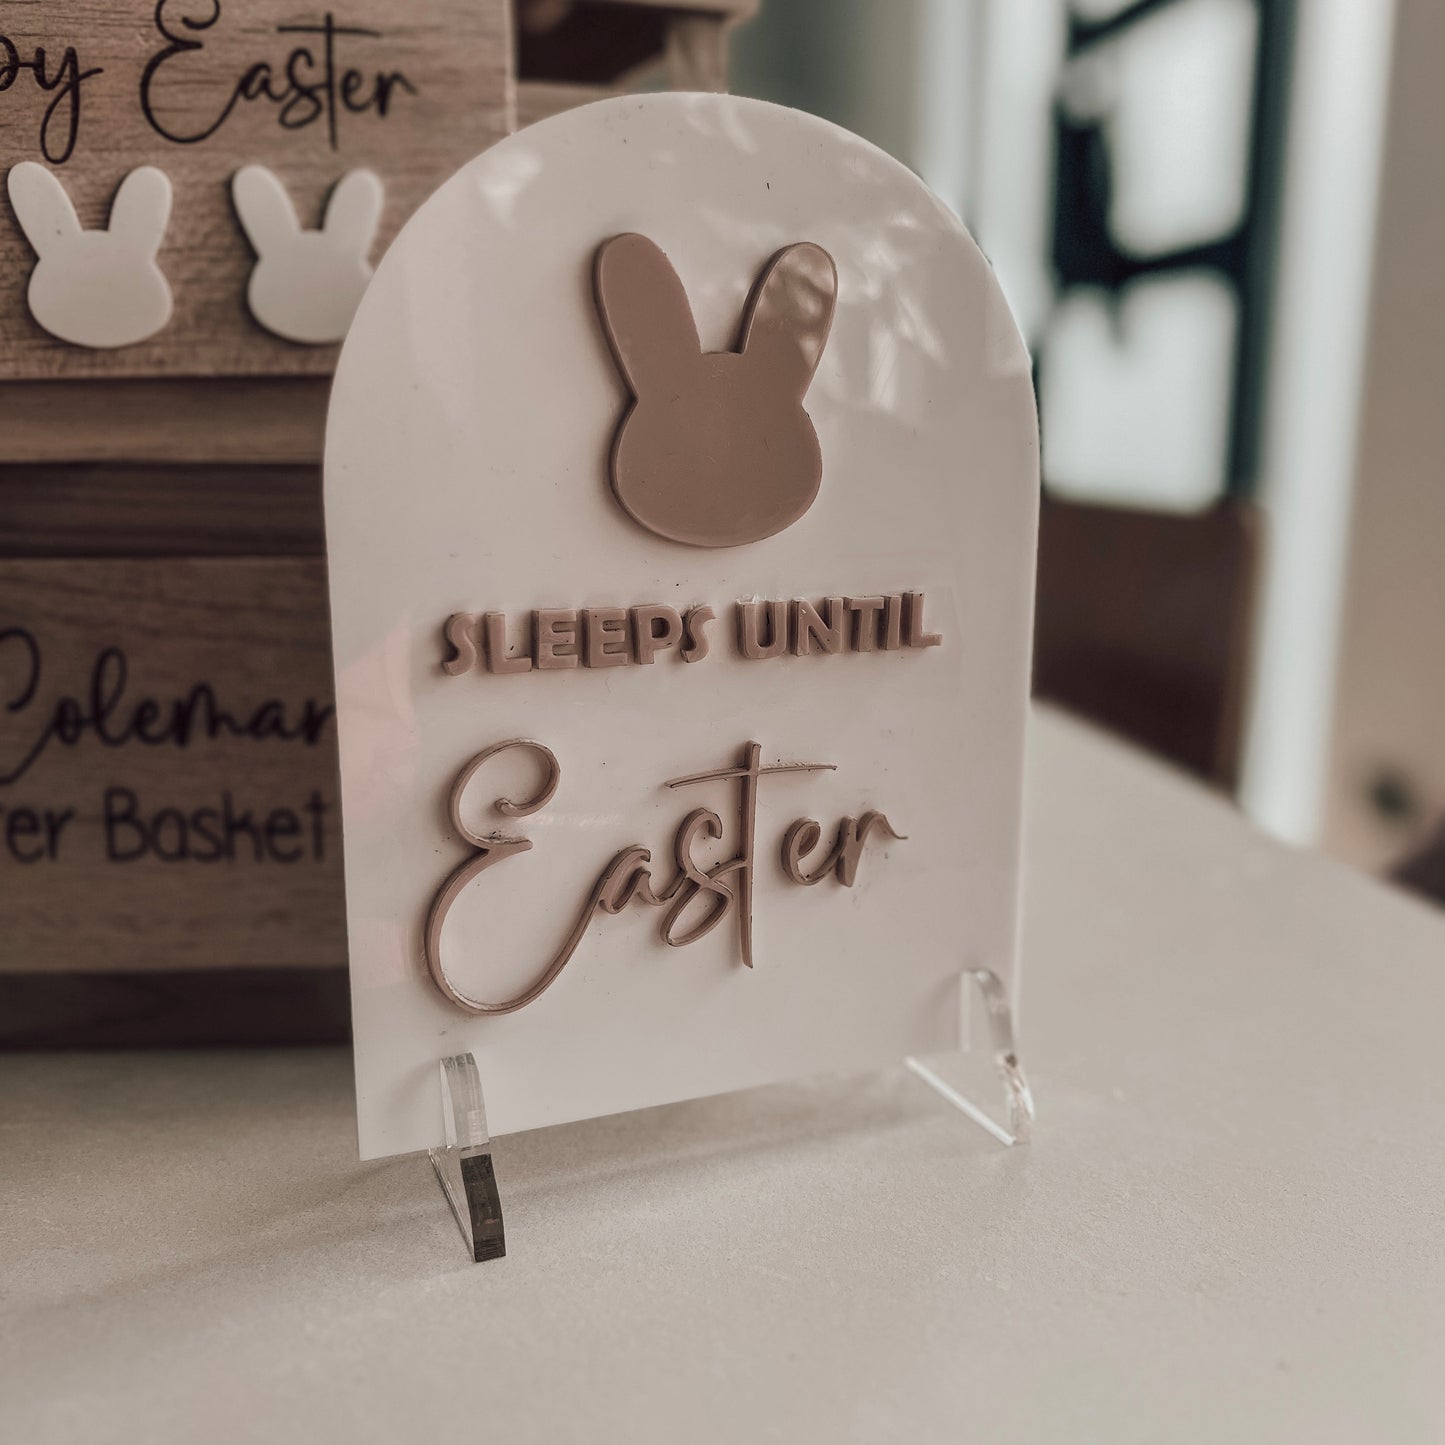 The Easter Countdown Sign